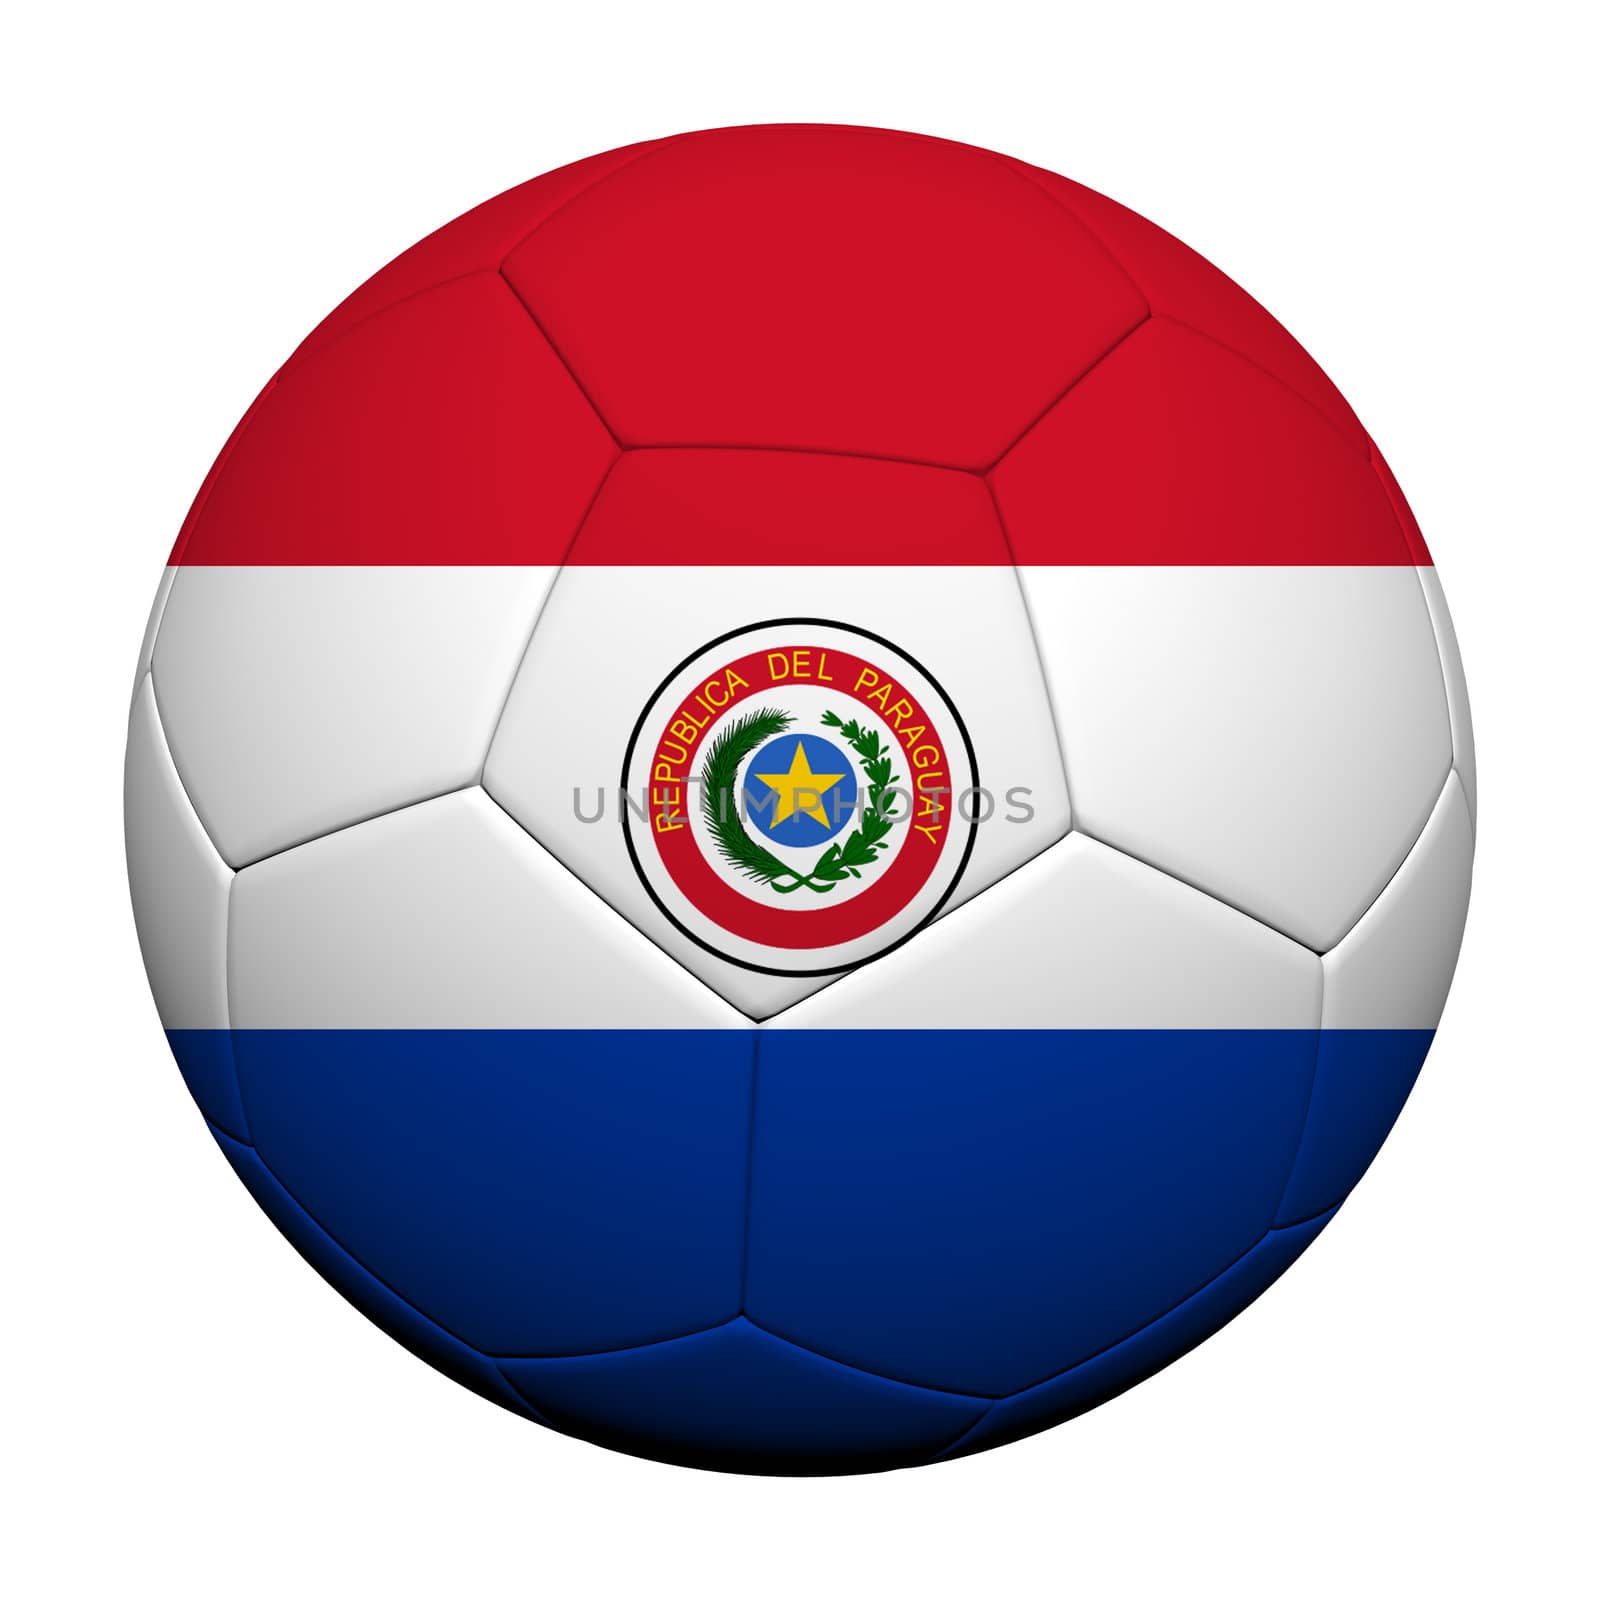 Paraguay Flag Pattern 3d rendering of a soccer ball 